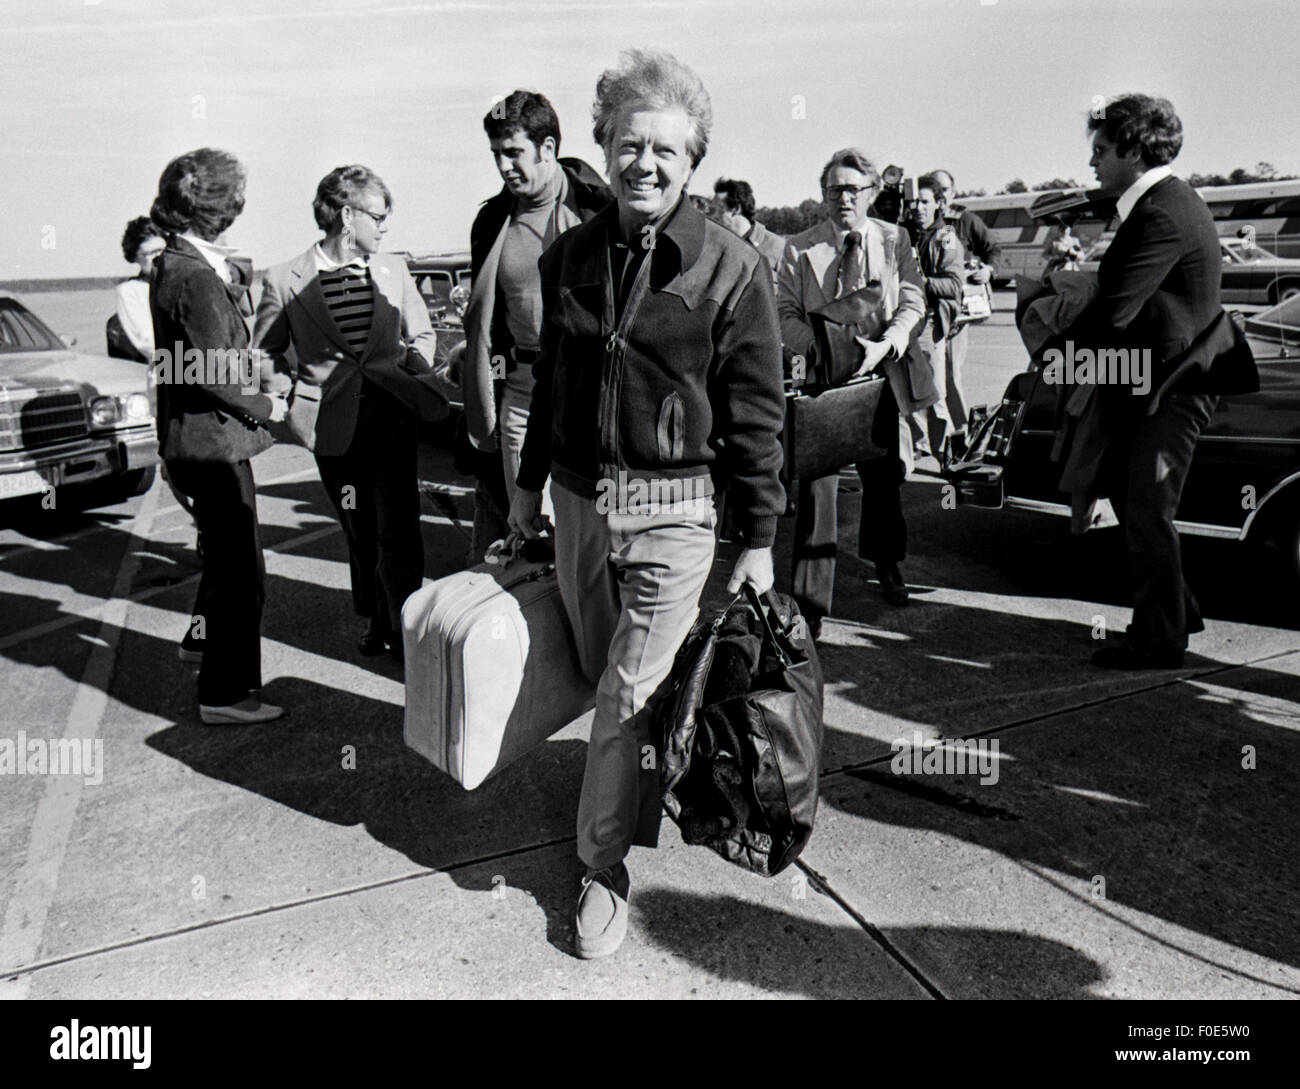 St. Louis, MO, USA. 2nd Jan, 1977. Governor Jimmy Carter on the presidential campaign trail. © Ken Hawkins/ZUMA Wire/Alamy Live News Stock Photo